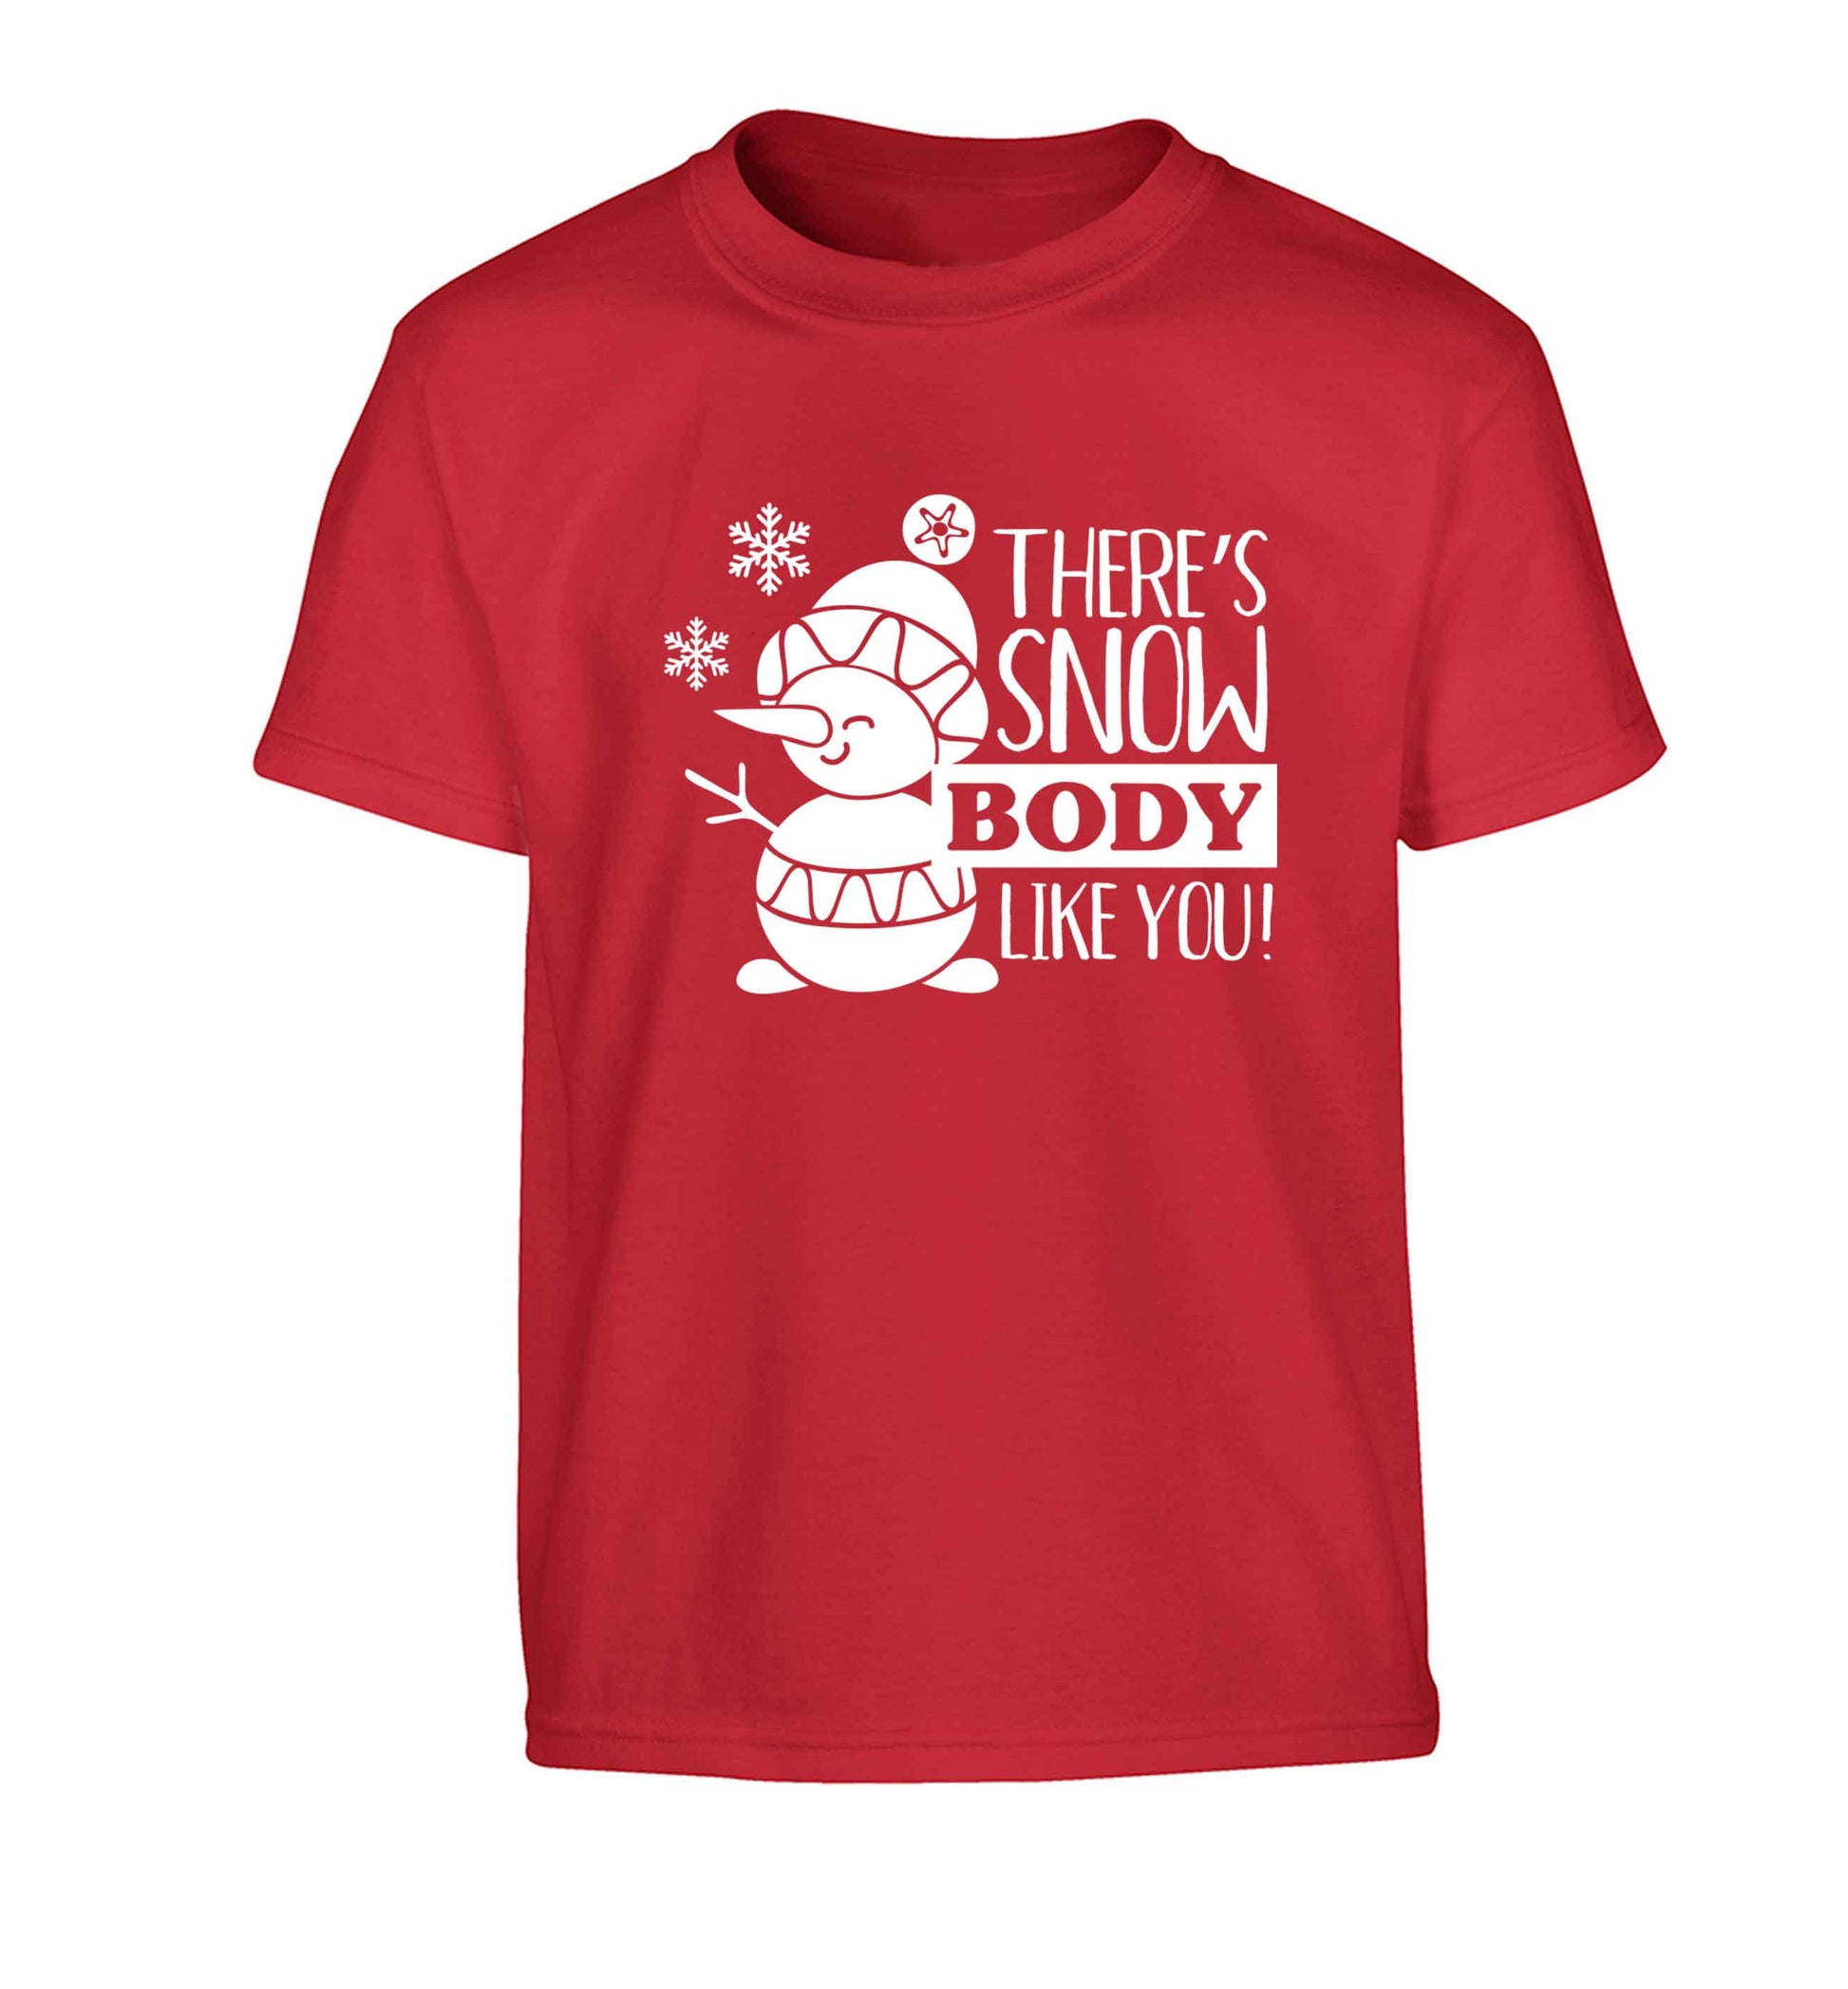 There's snow body like you Children's red Tshirt 12-13 Years